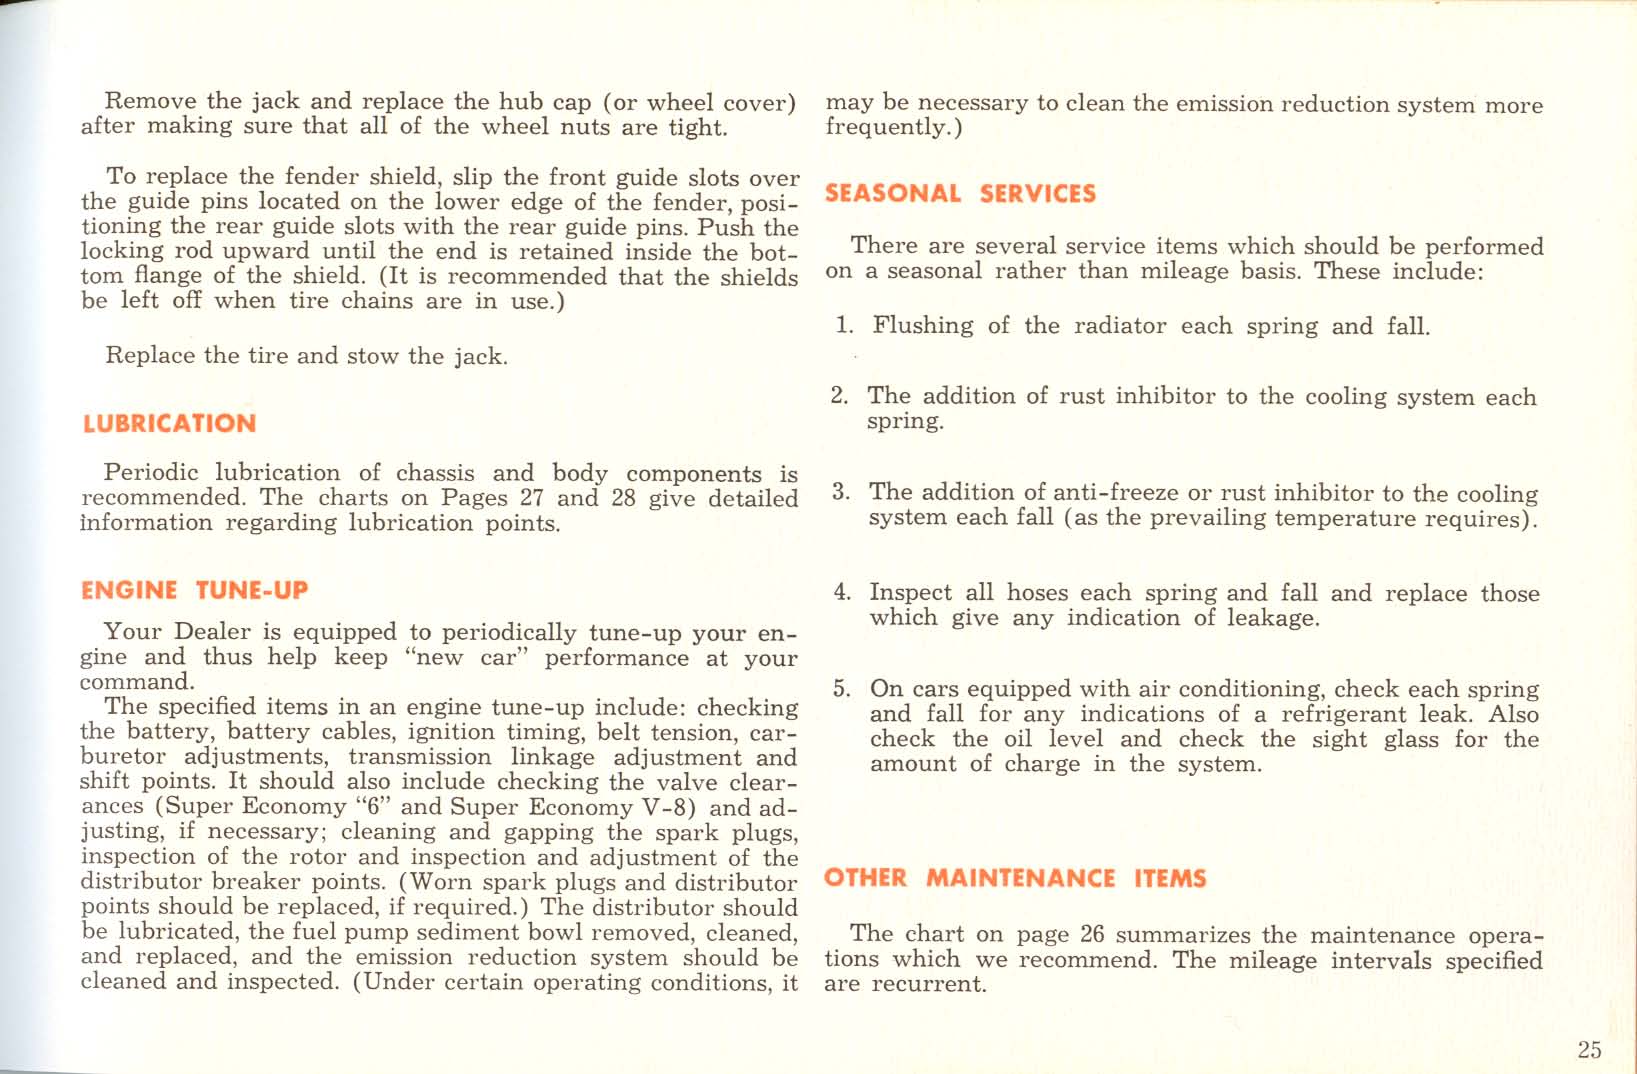 1961 Mercury Owners Manual Page 35